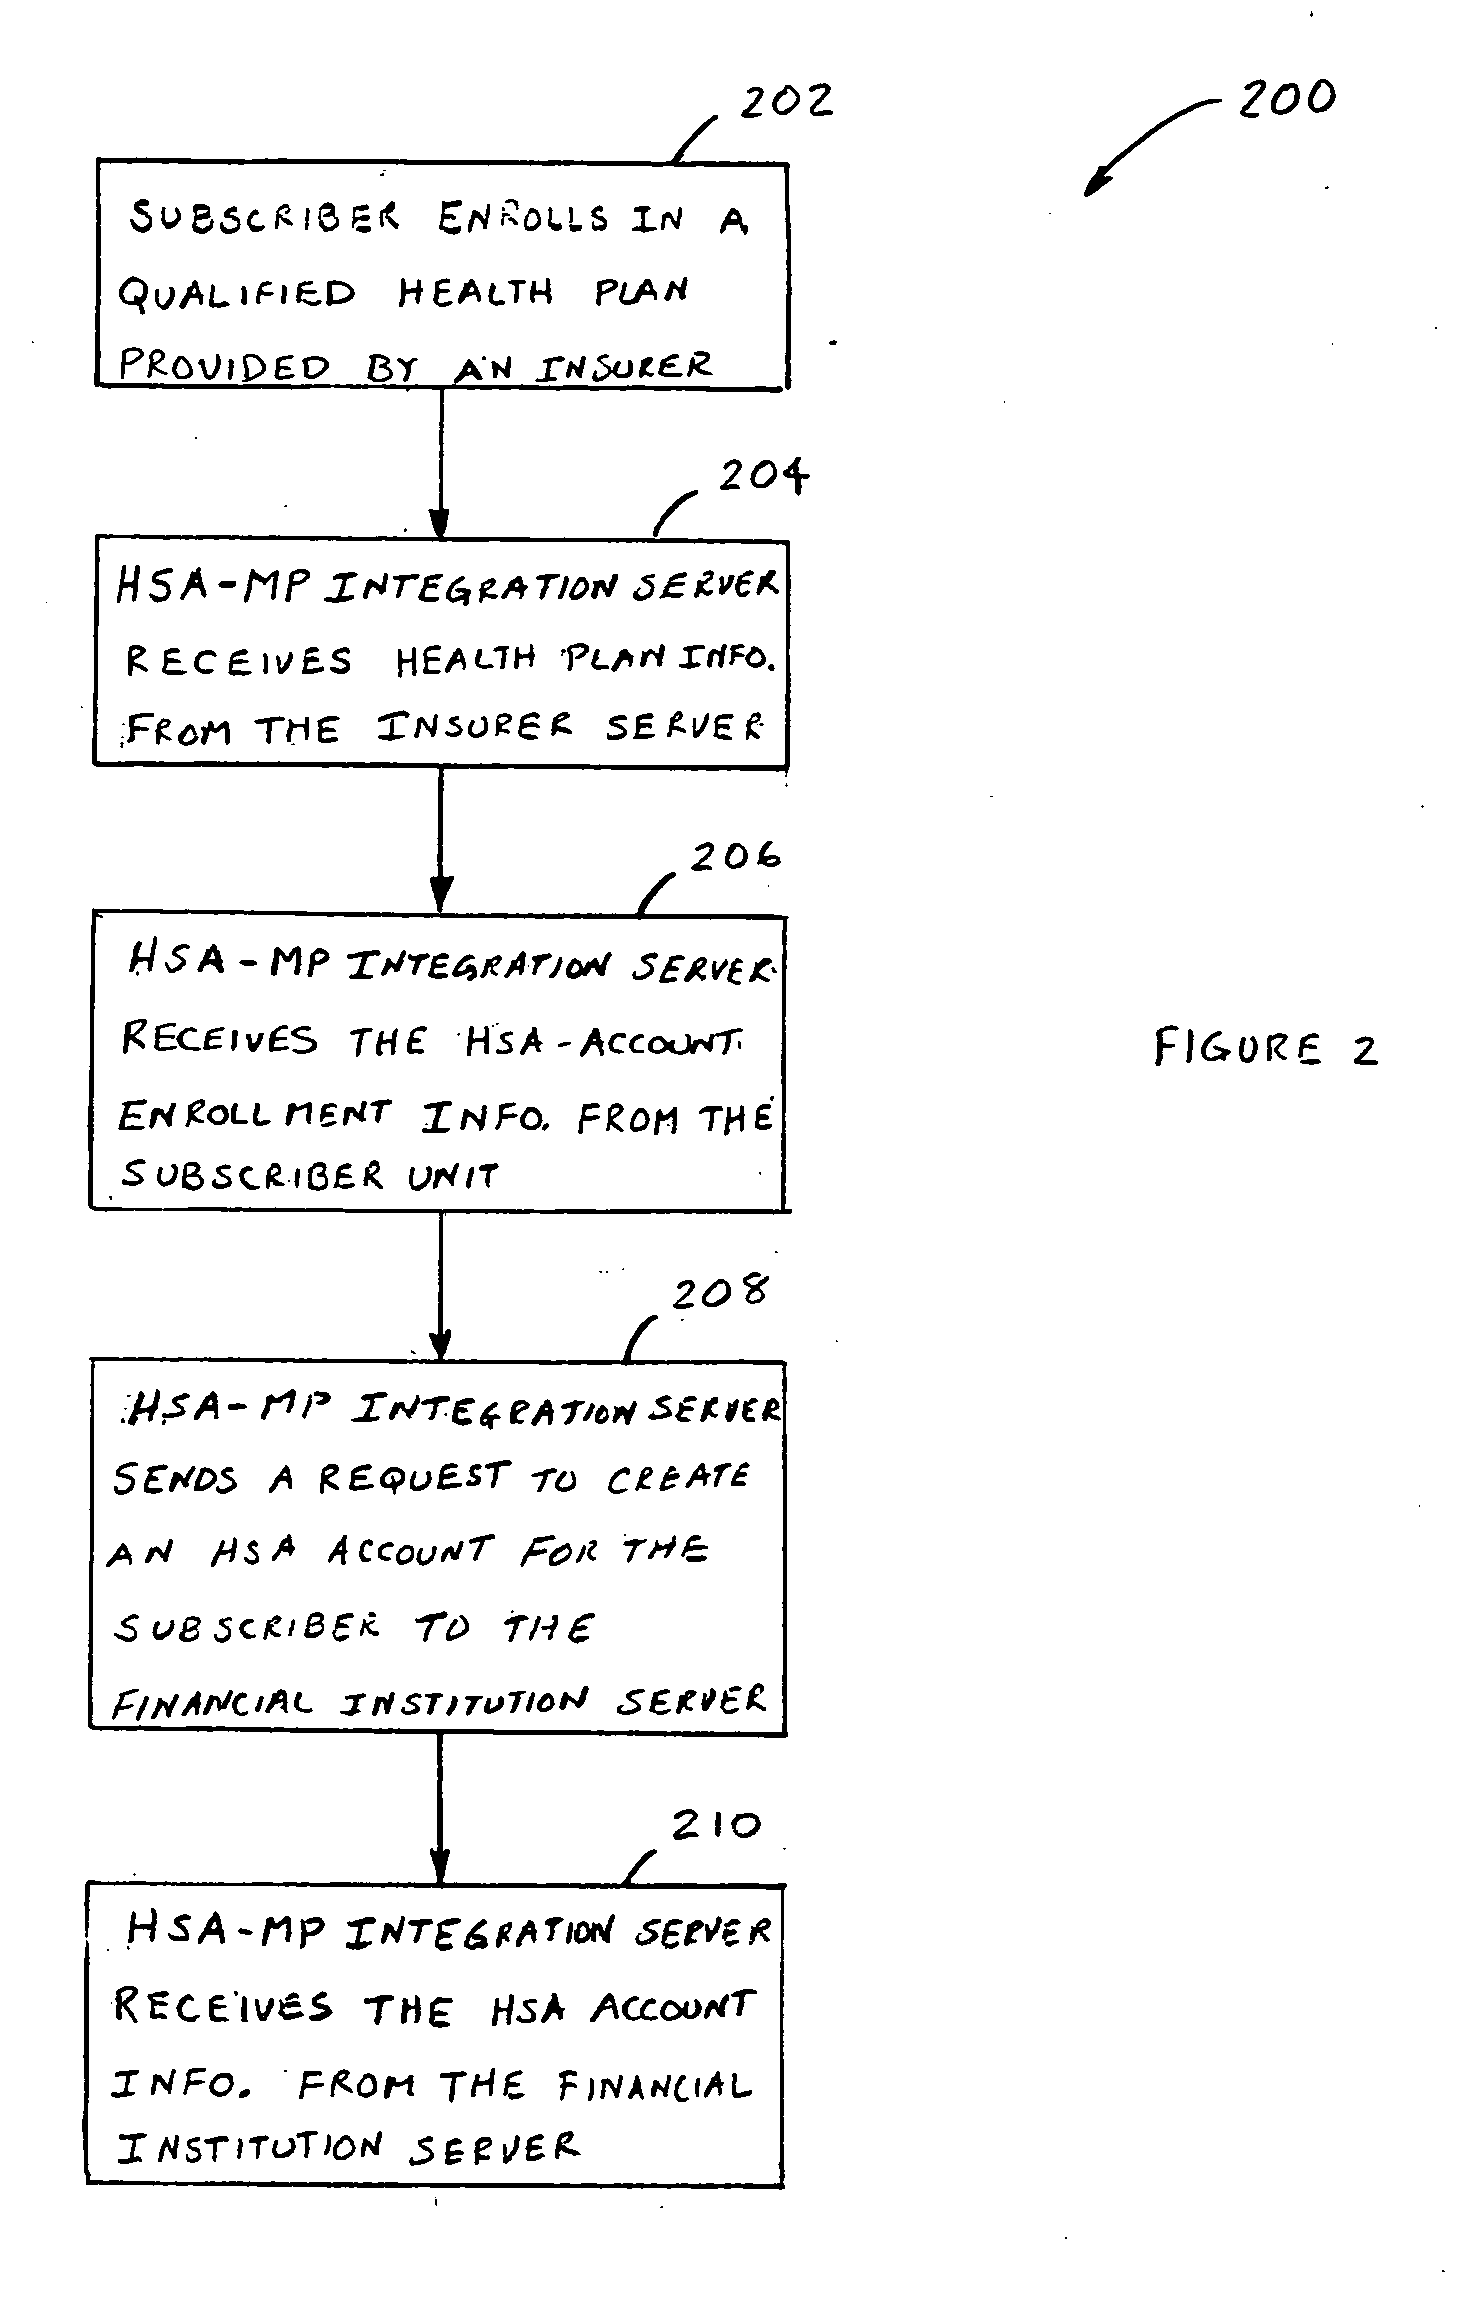 System and method of integrating information related to health care savings accounts and health care plans